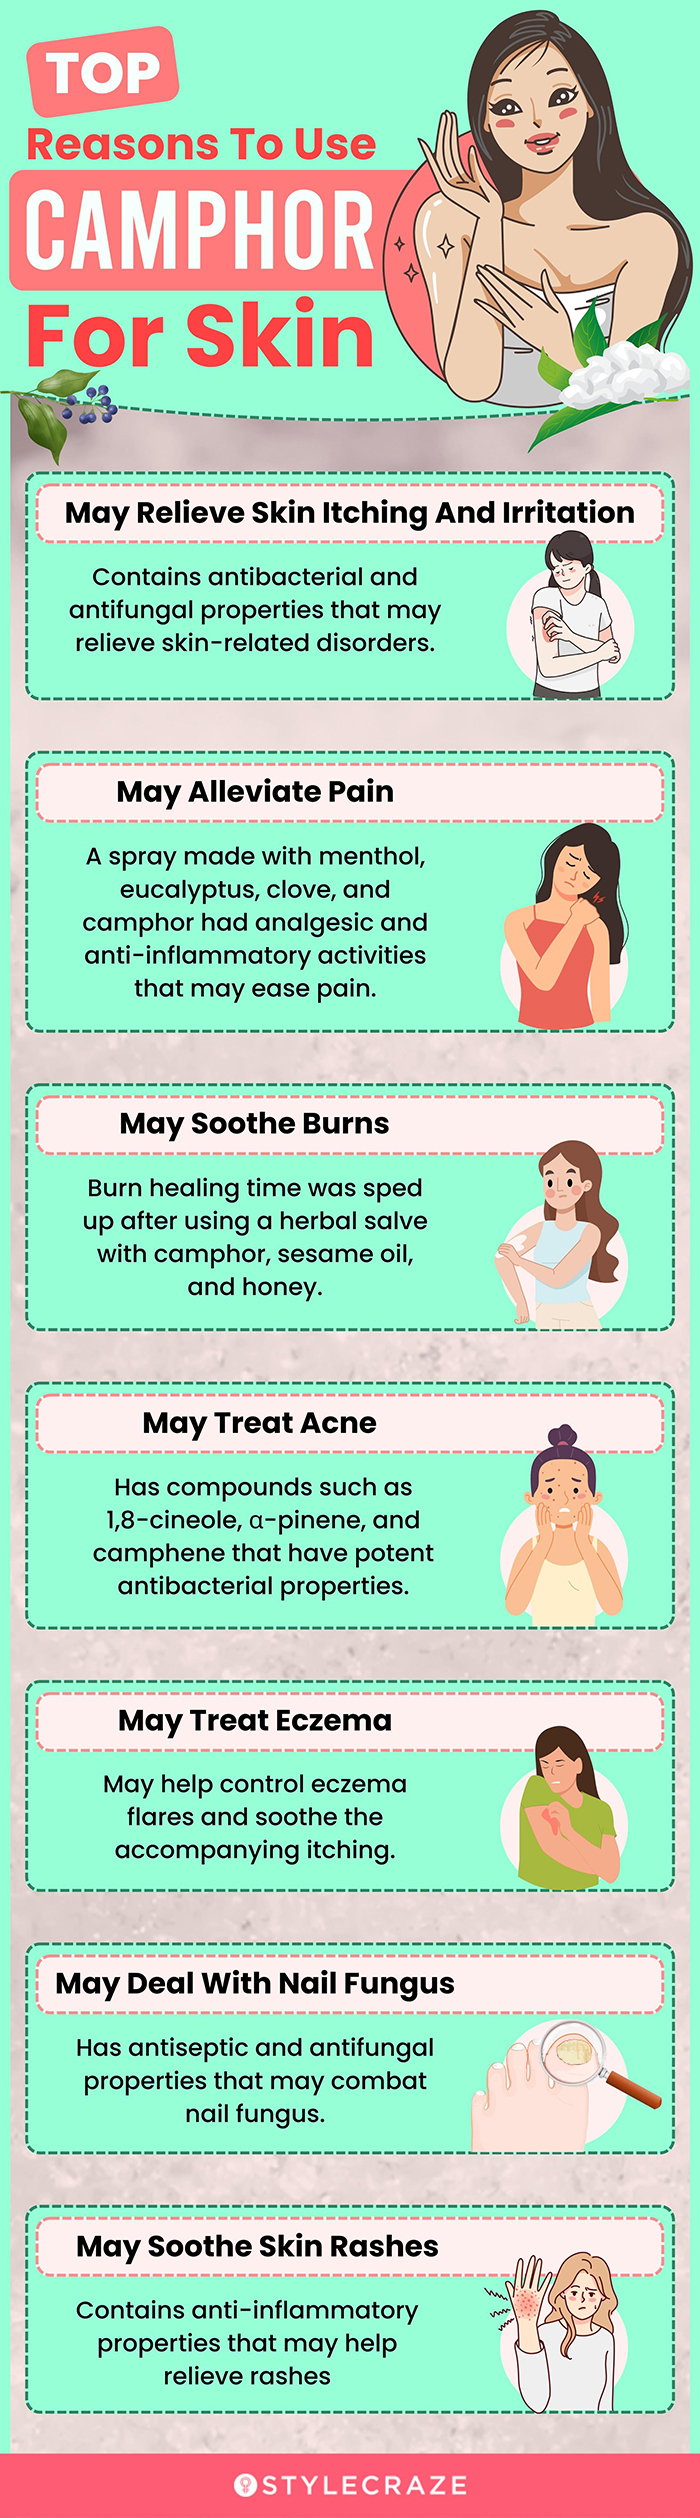 top reasons to use camphor for skin (infographic)